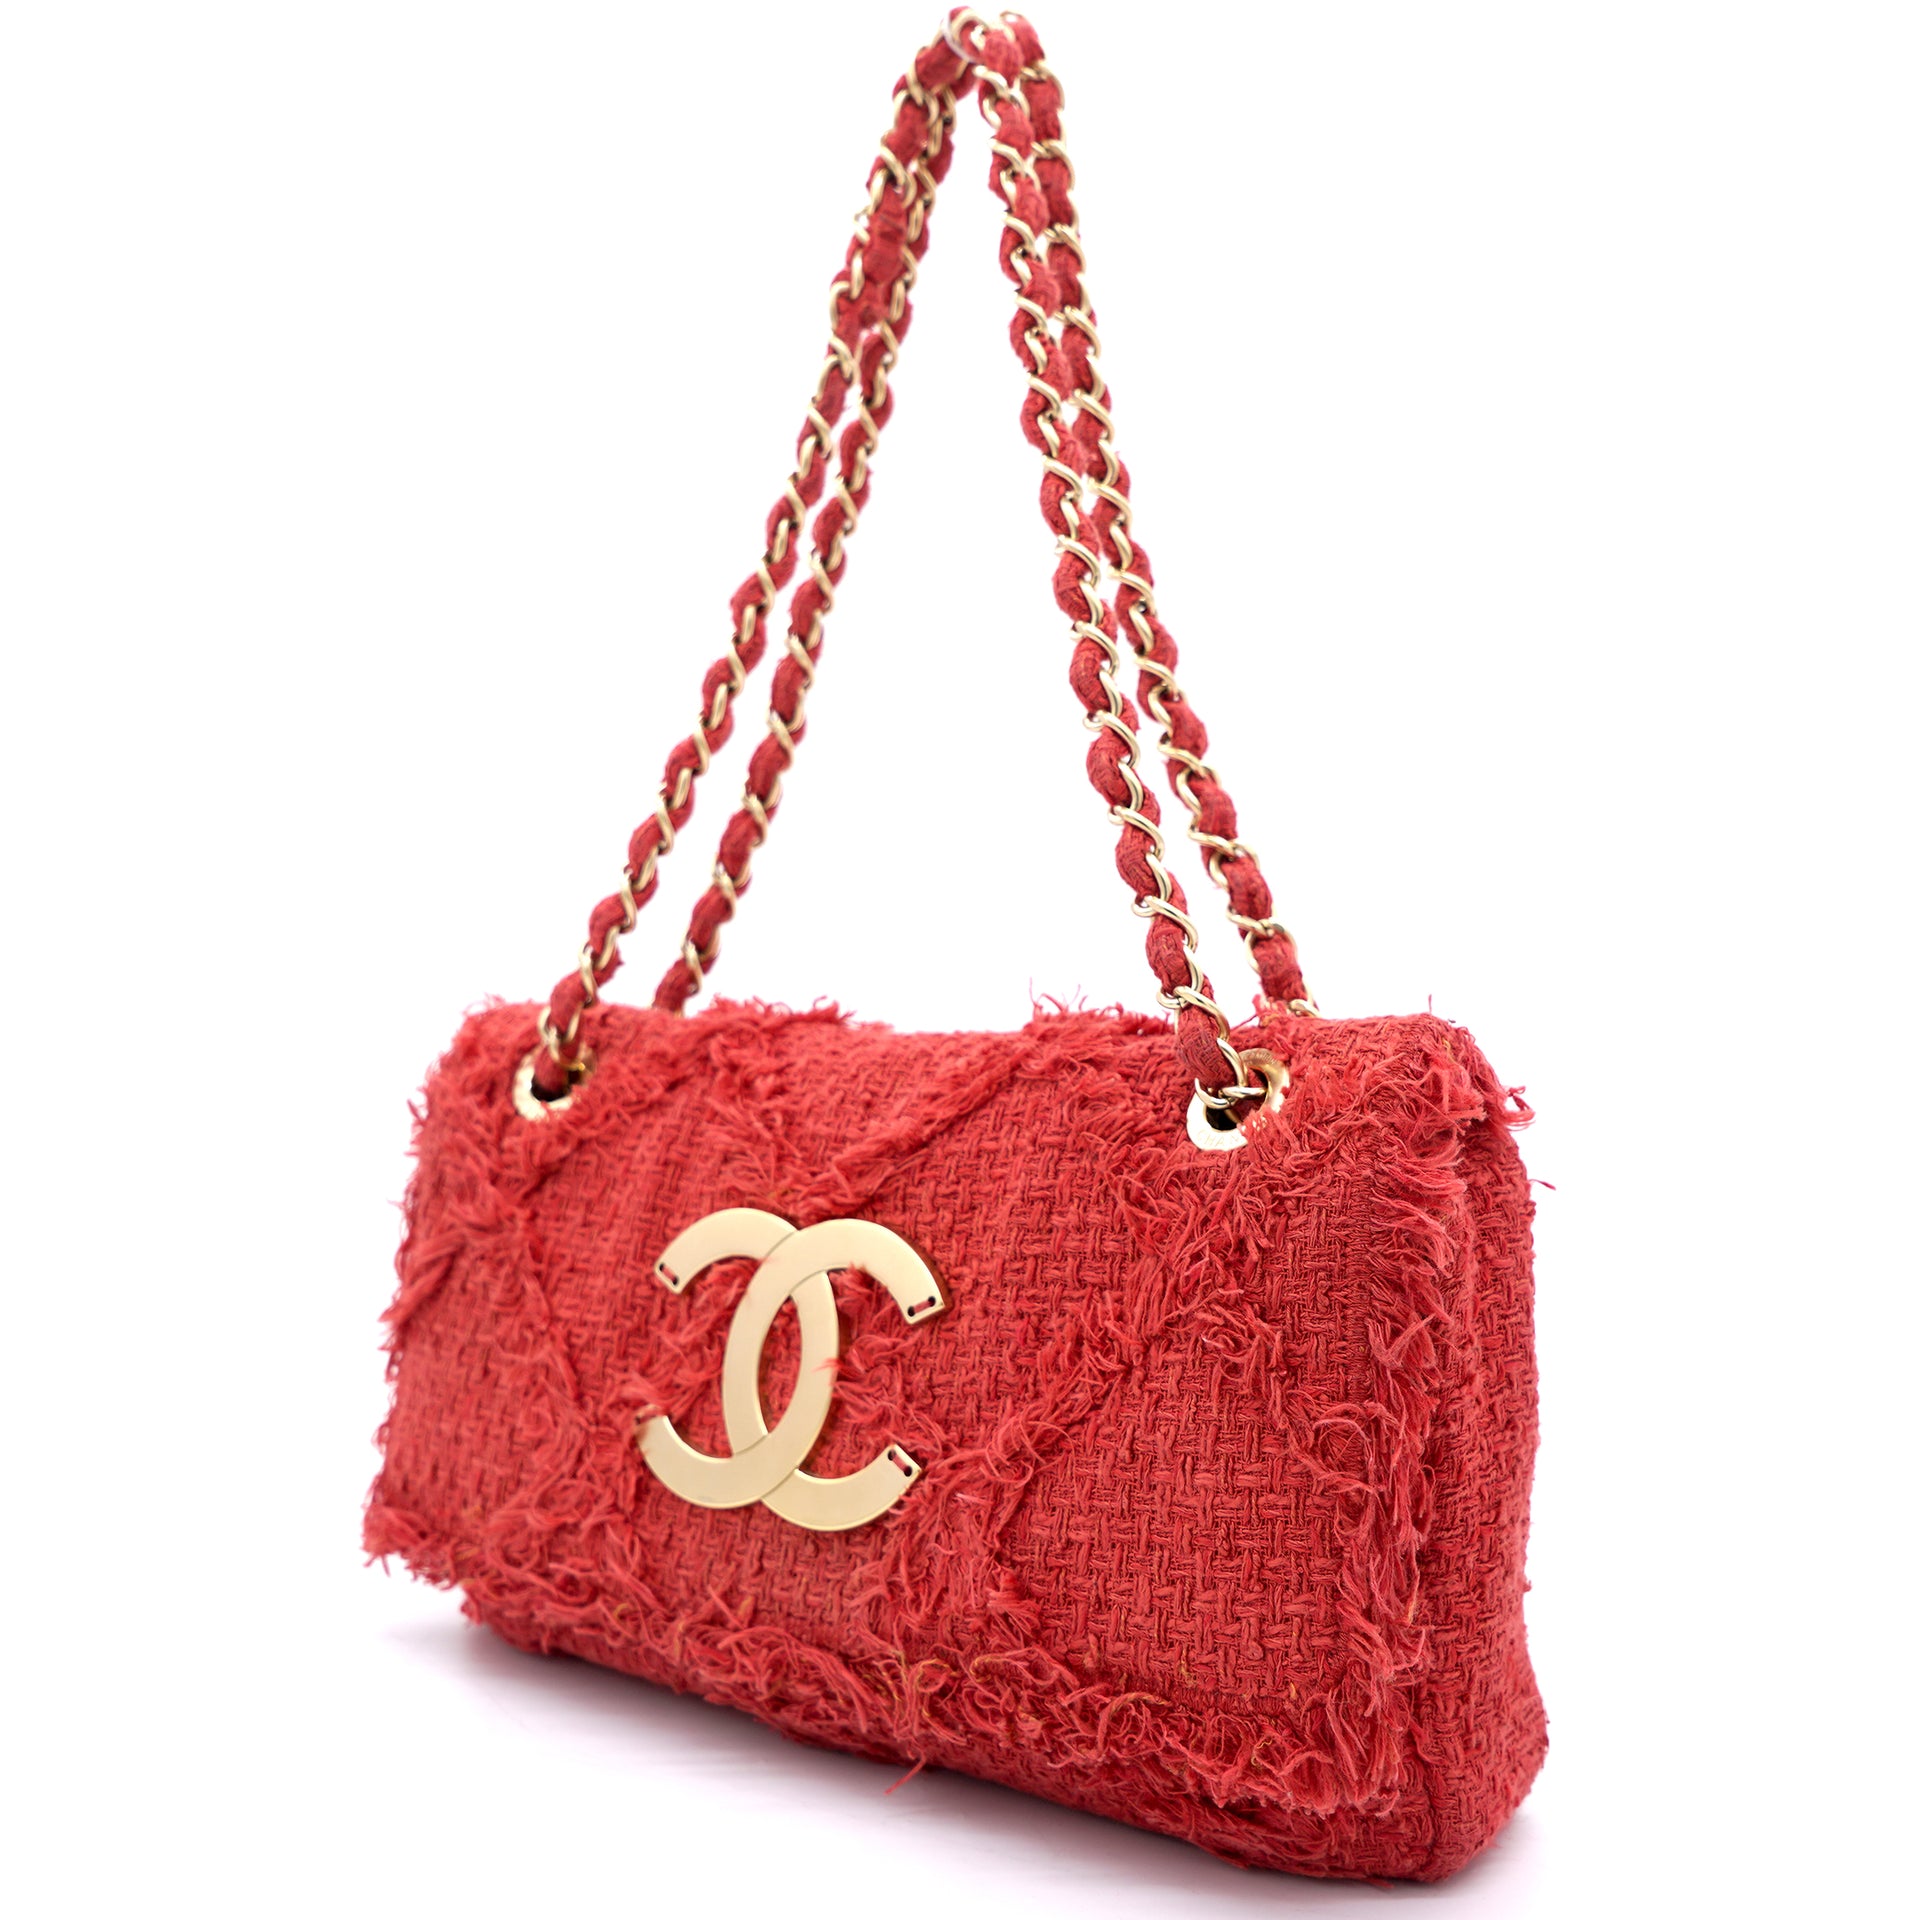 CHANEL Red Tweed Flap Bag at Rice and Beans Vintage